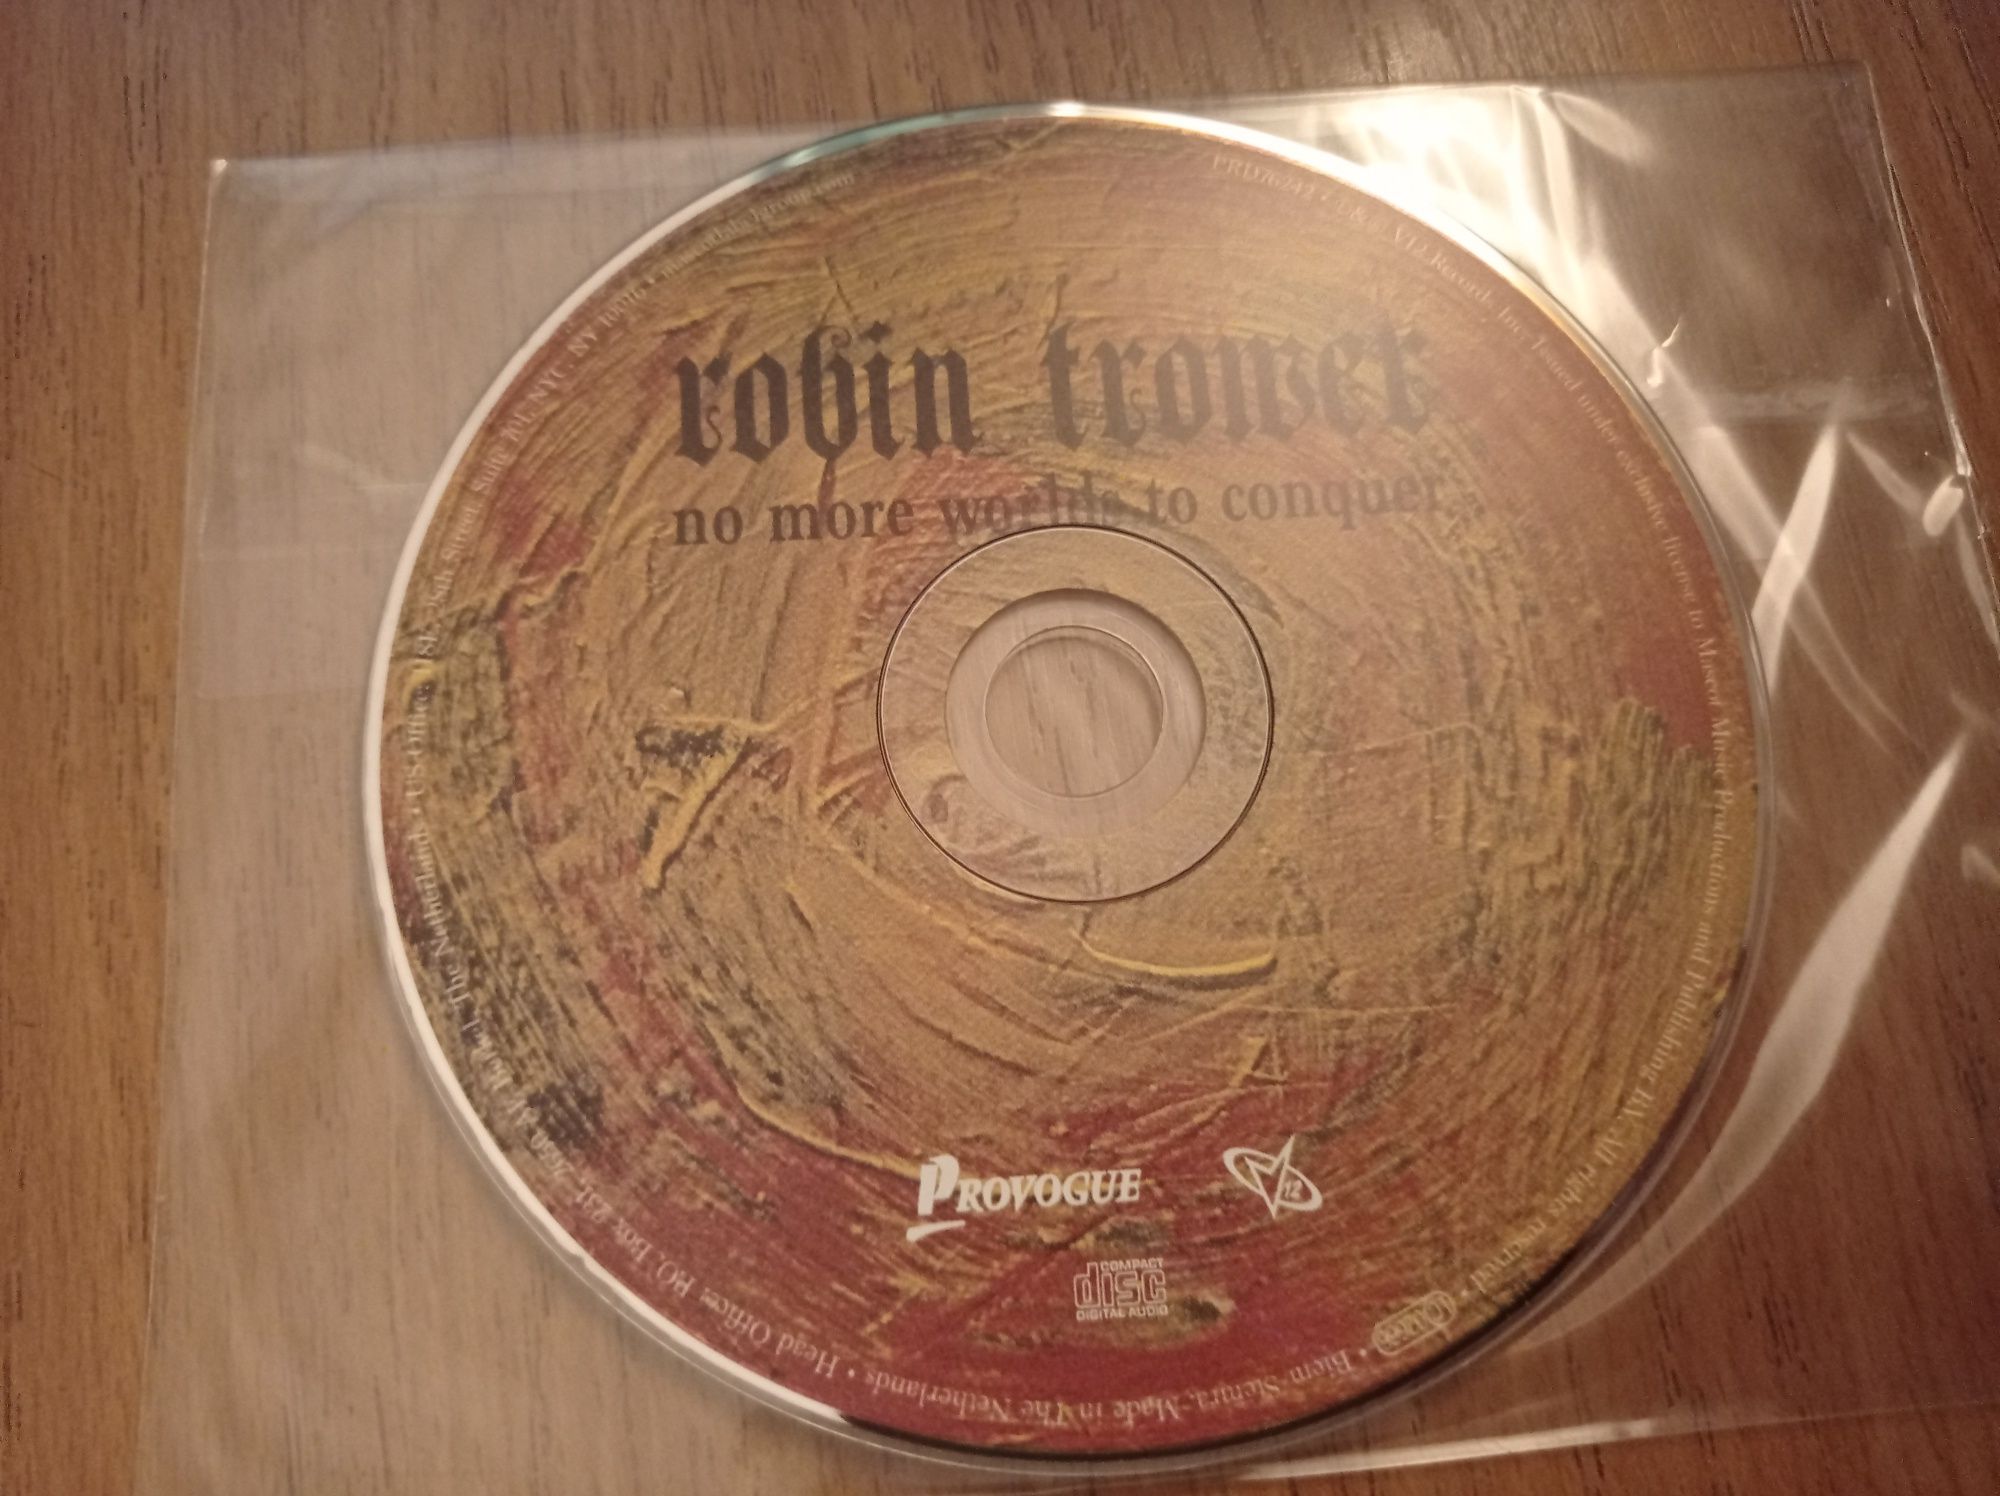 Robin Trower - No more worlds to conquer